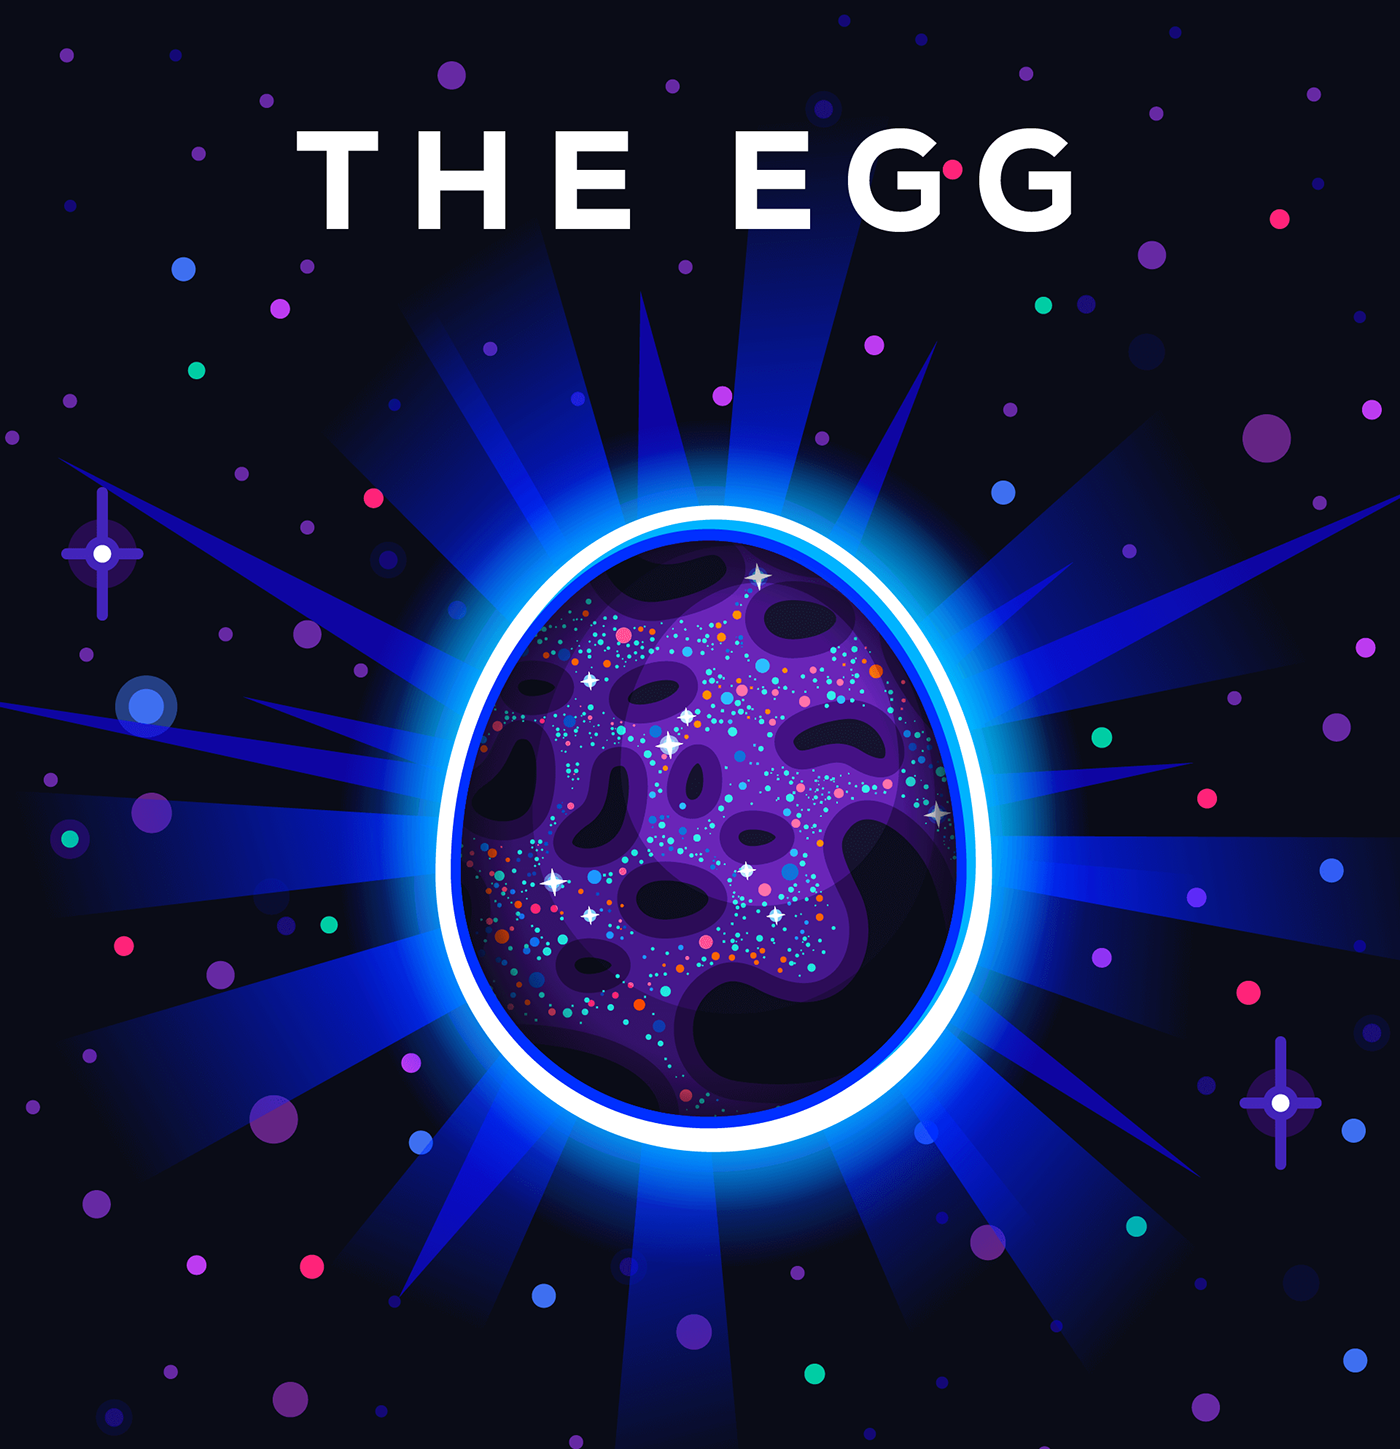 404 error page deisgn example #437: The Egg - A Short Story